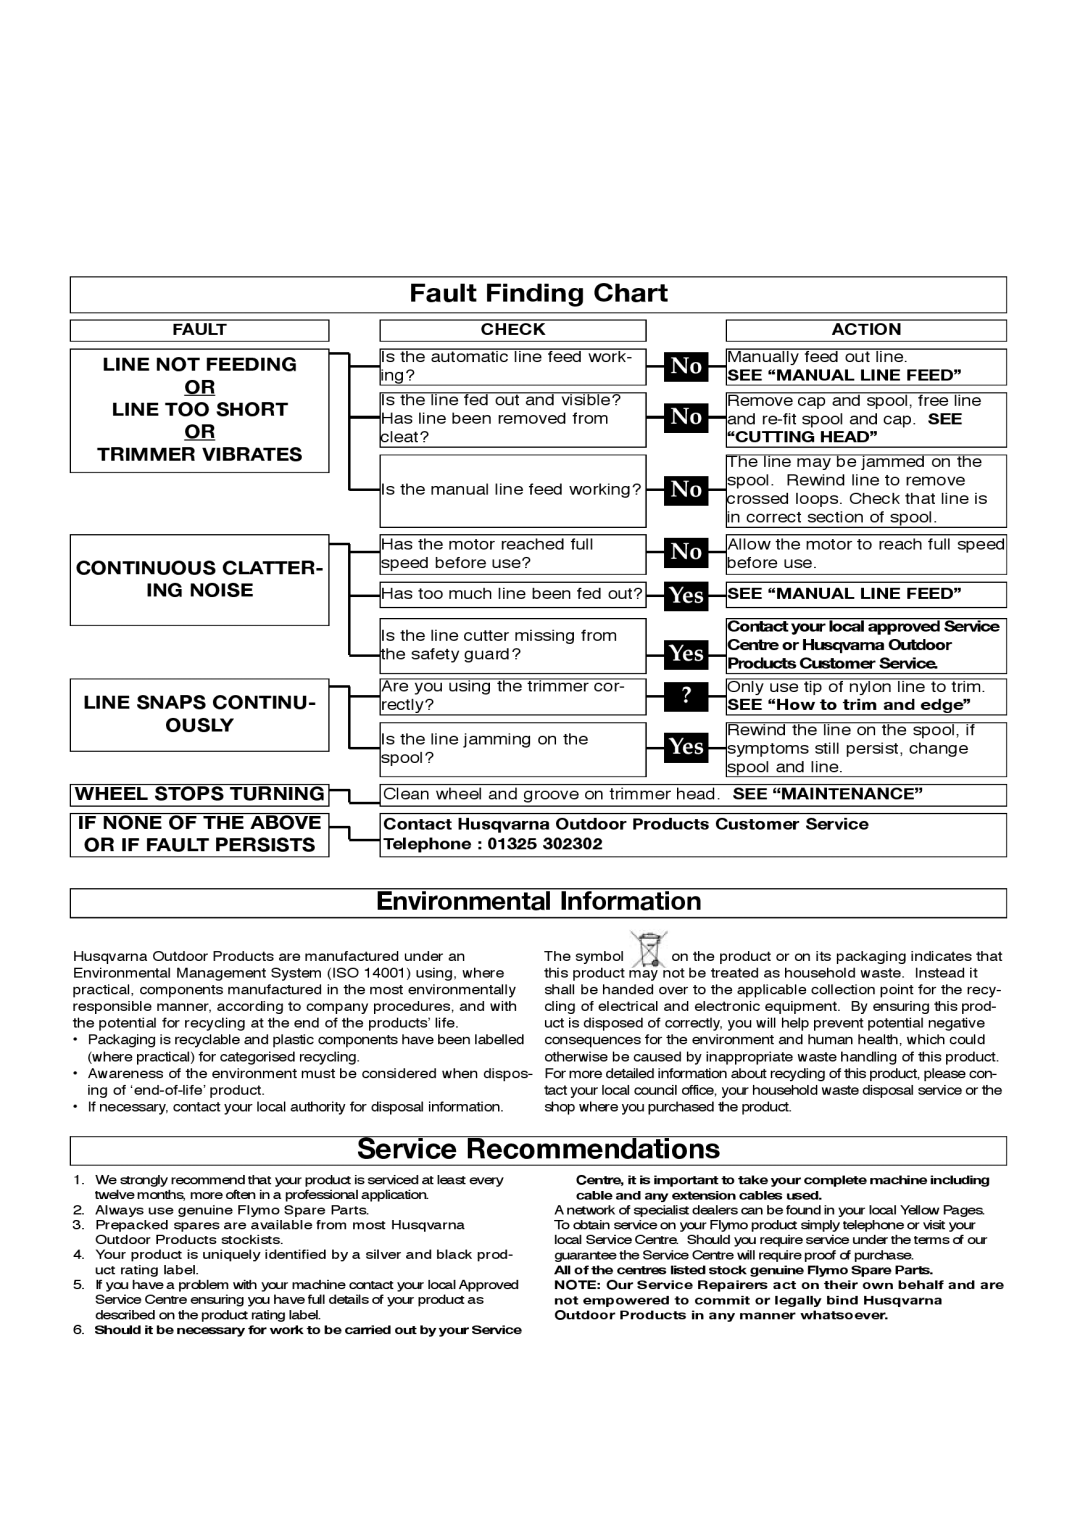 Flymo Sabre Trim Service Recommendations, Fault Finding Chart, Environmental Information, Continuous Clatter, Ing Noise 